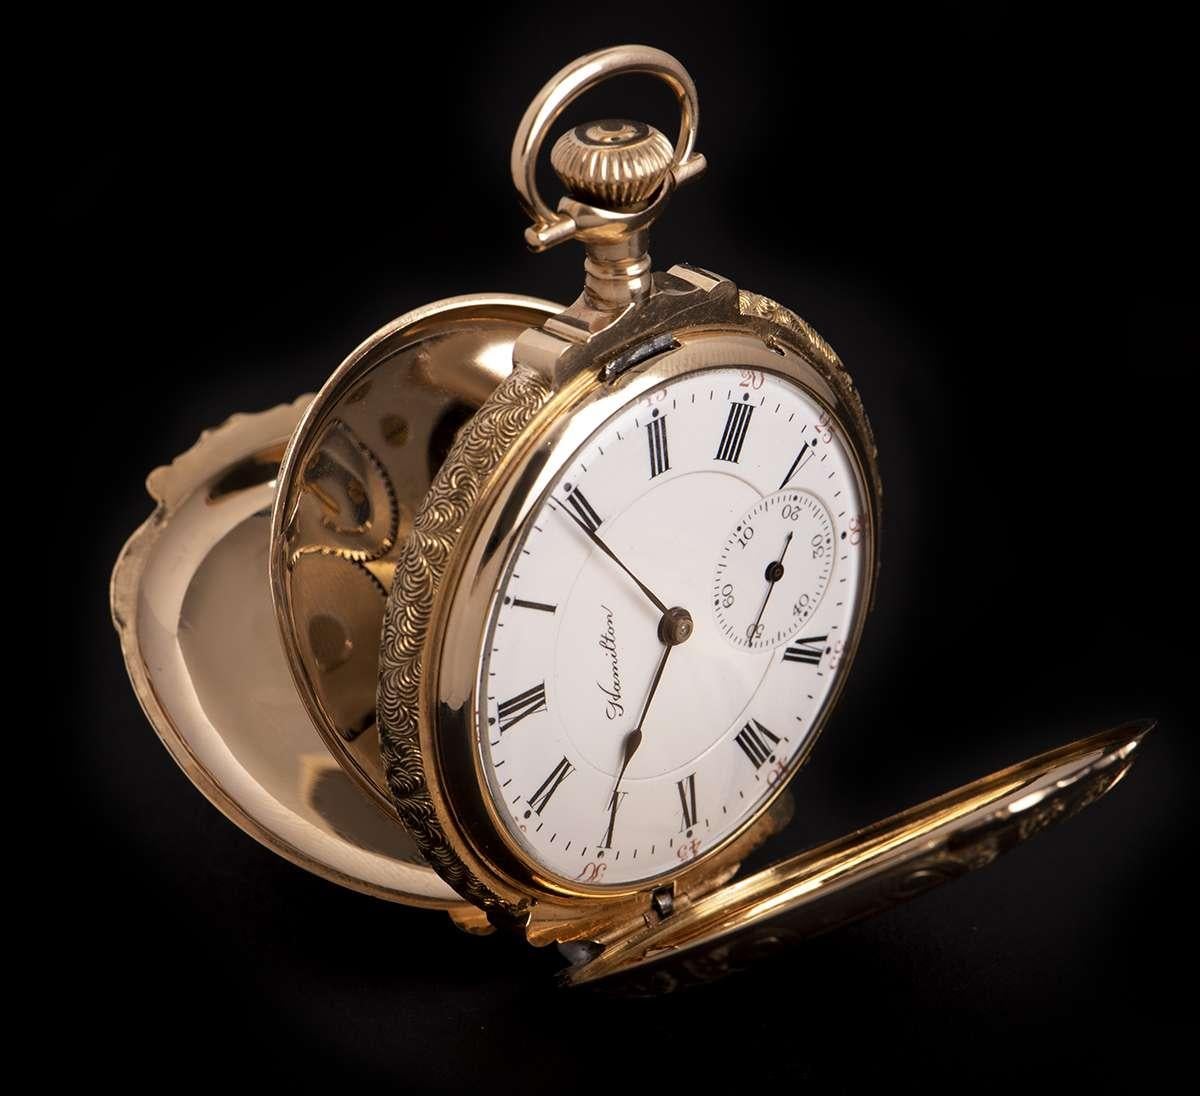 A Rare 50 mm 14k Tri-Gold Full Hunter Vintage Gents Pocket Watch, white enamel dial with roman numerals, small seconds at 6 0'clock, a fixed 14k tri-gold bezel, plastic glass, an 14k tri-gold case with a stags head and floral motif design, an 14k